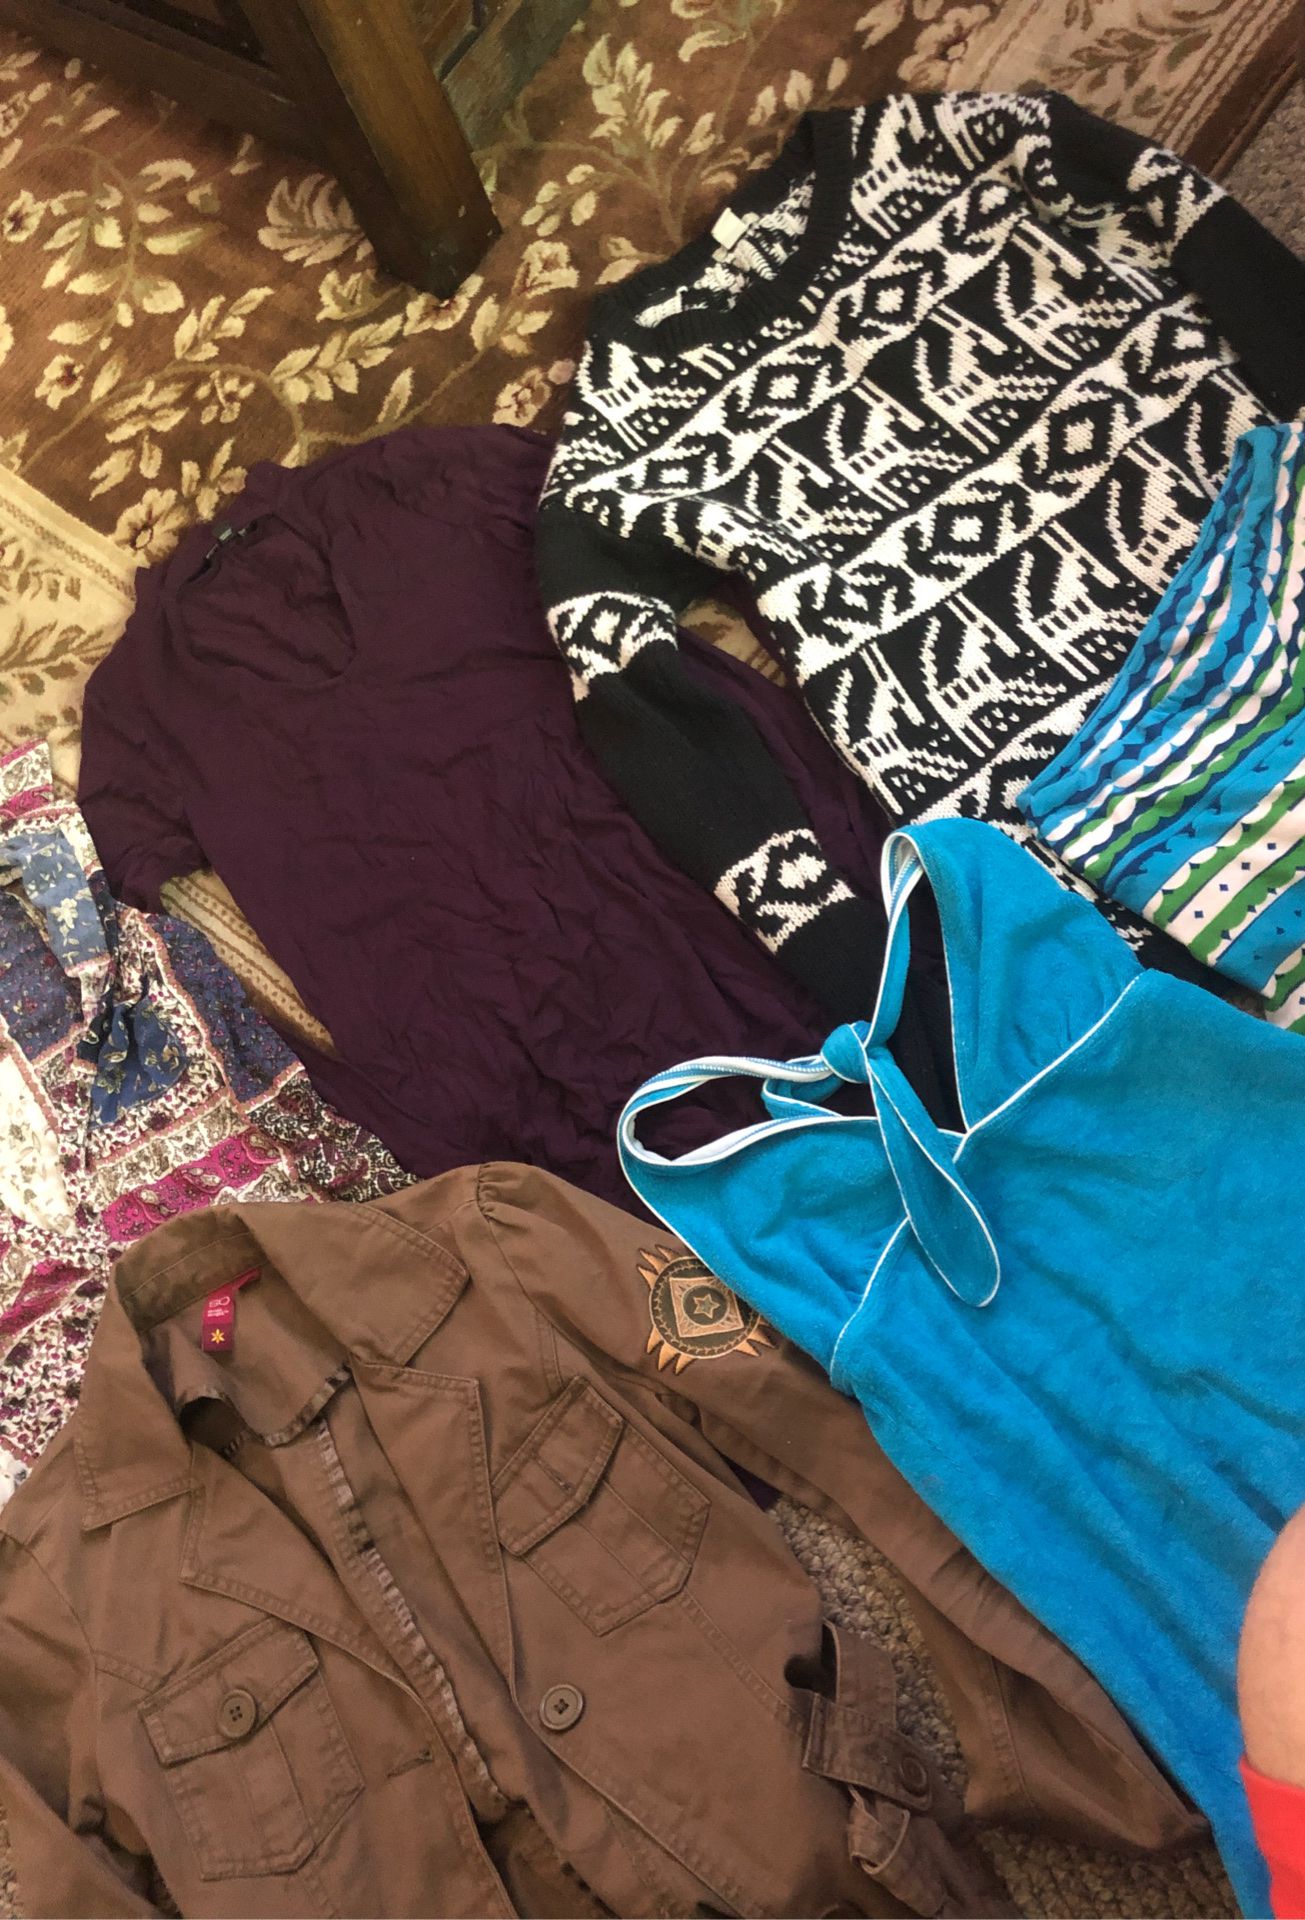 Women’s Small Clothes